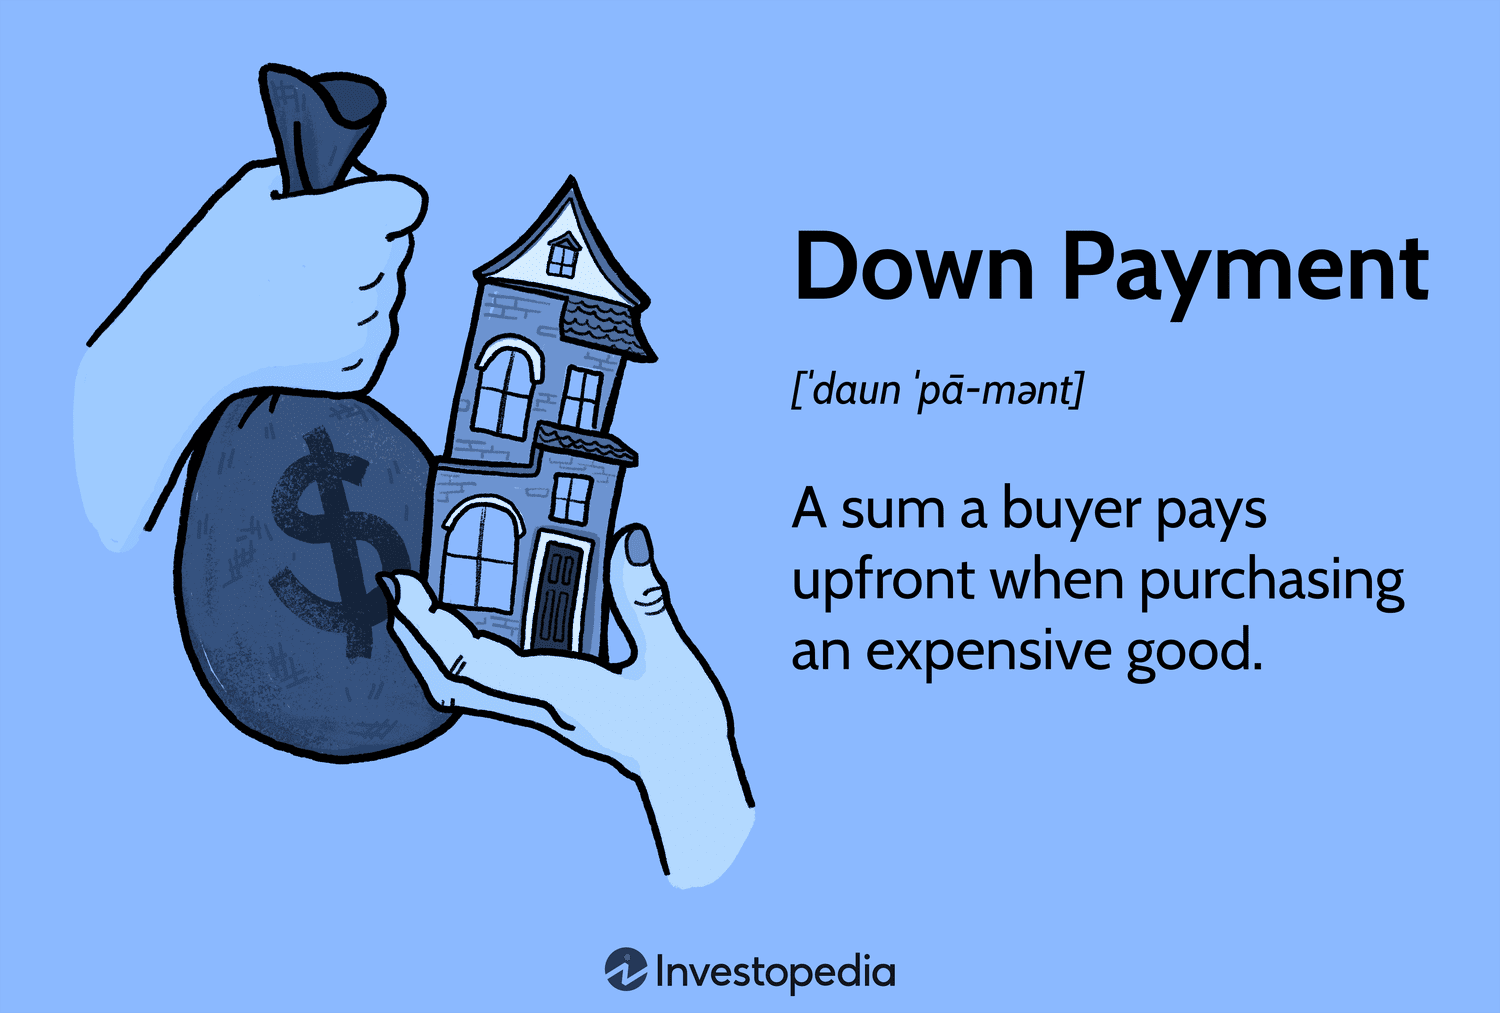 Down Payment: A sum a buyer pays upfront when purchasing an expensive good.